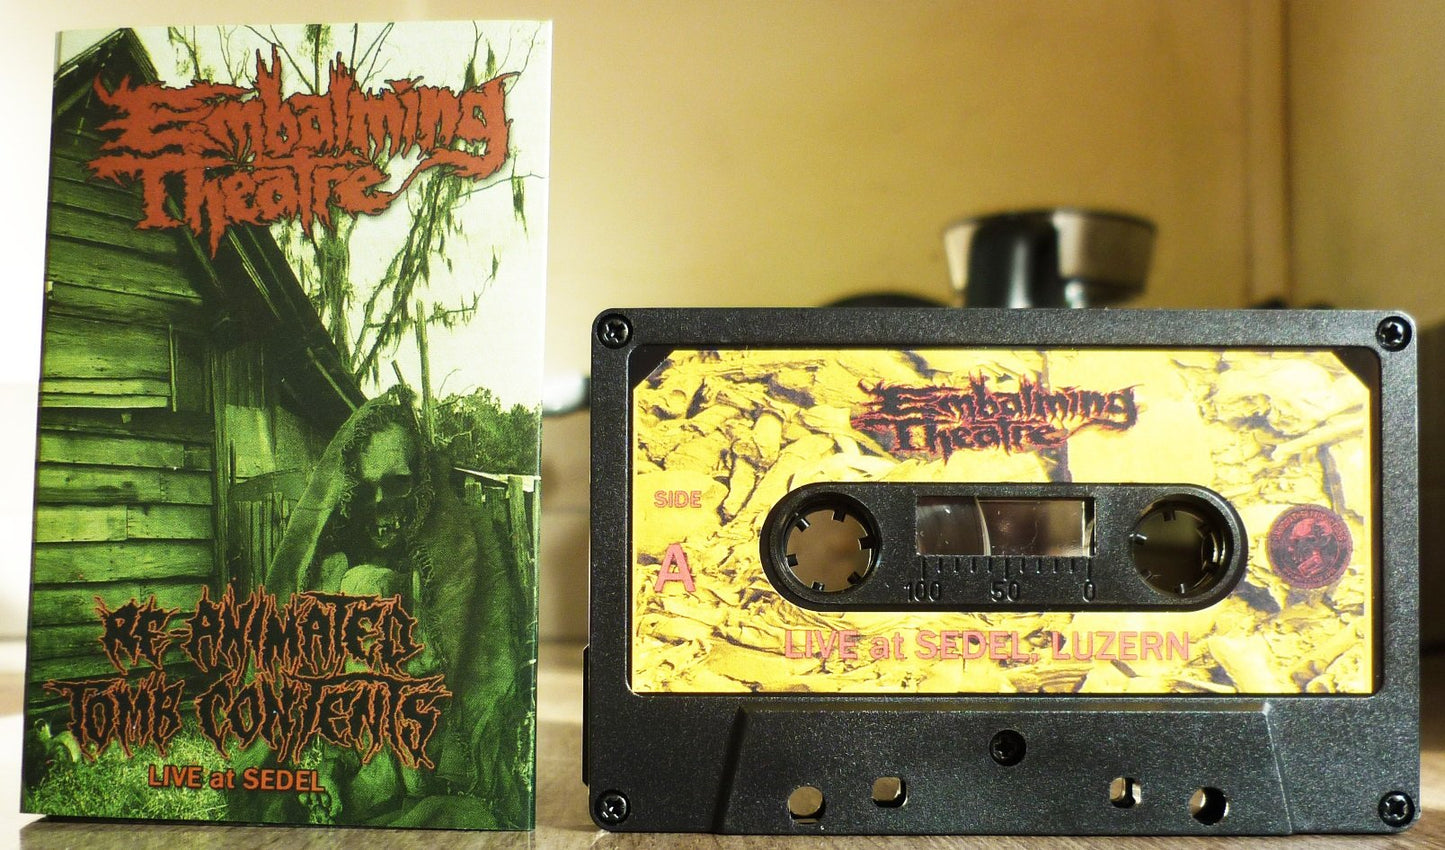 EMBALMING THEATRE "Re-animated Tomb Contents - Live At Sedel" Tape